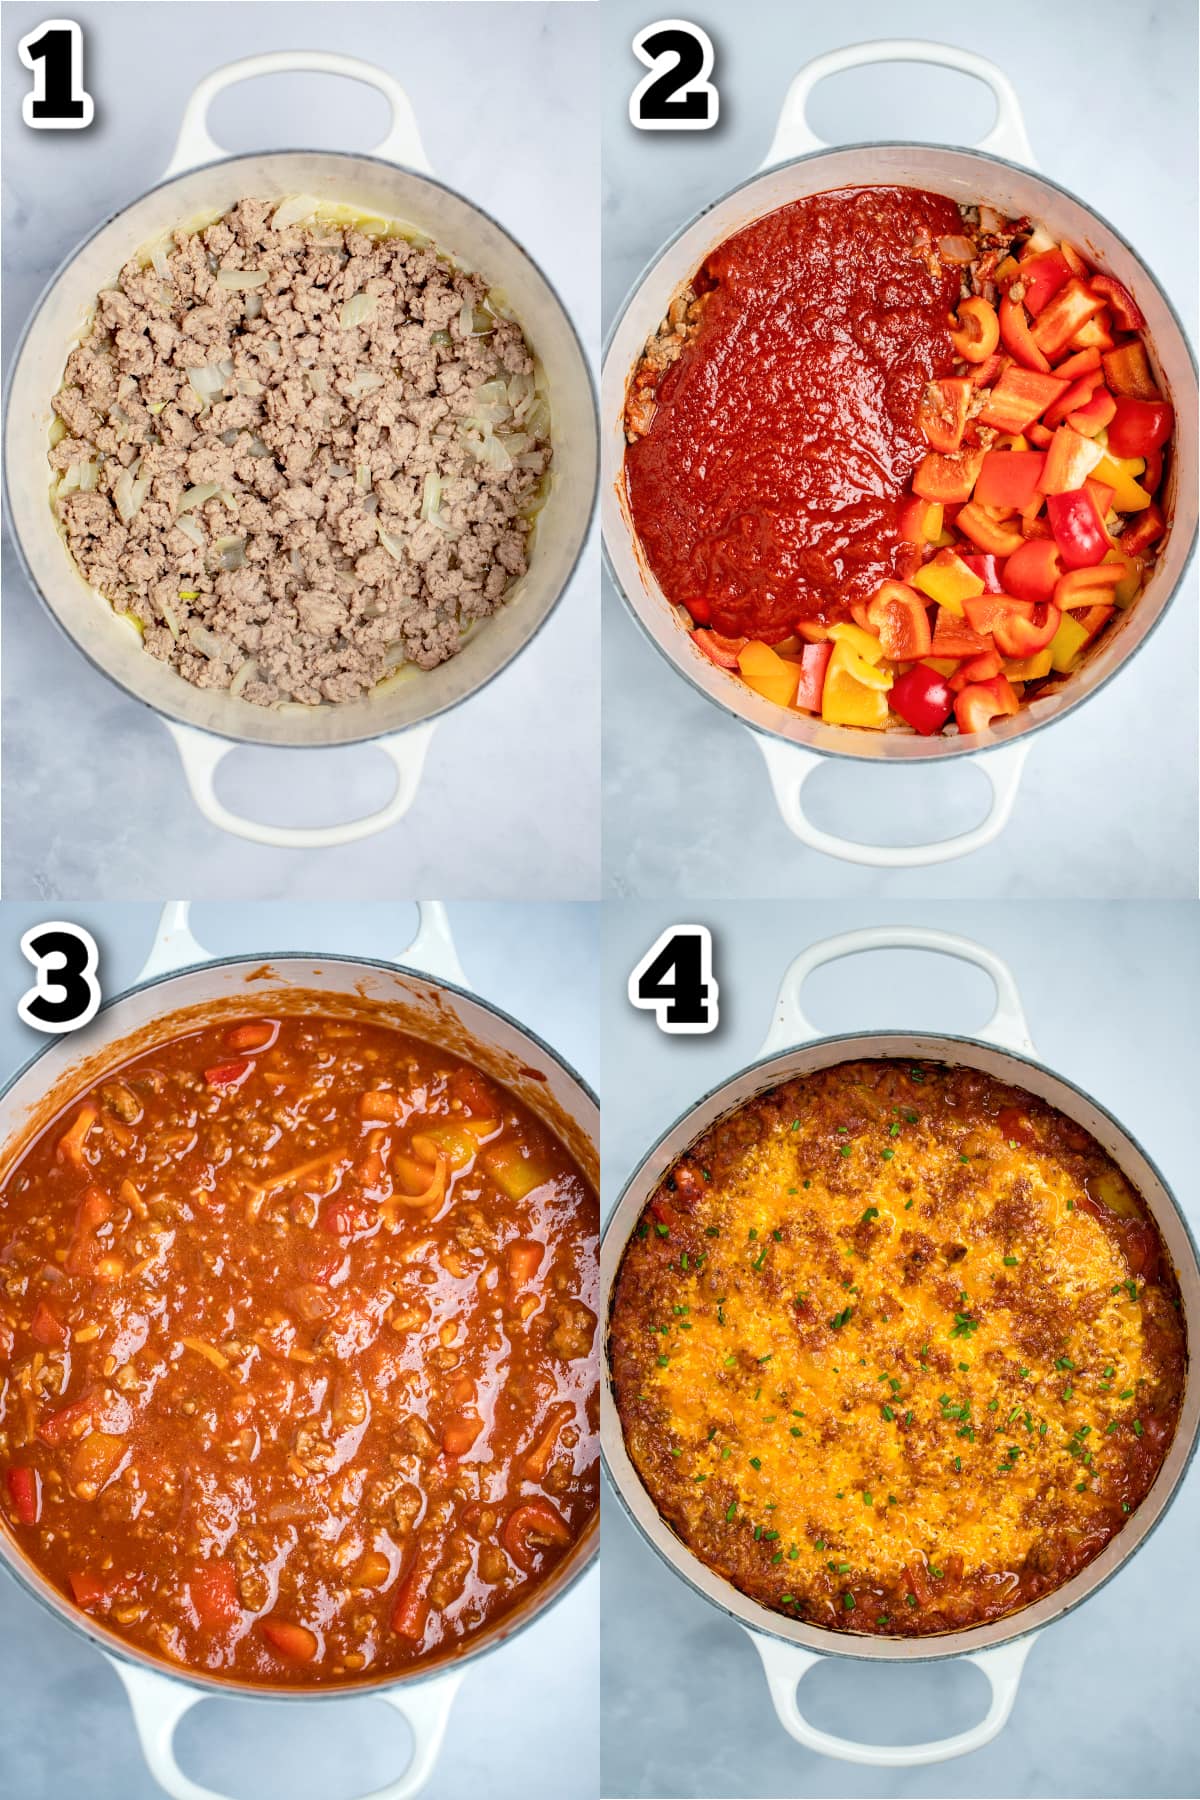 Step by step photos for how to make stuffed pepper casserole.